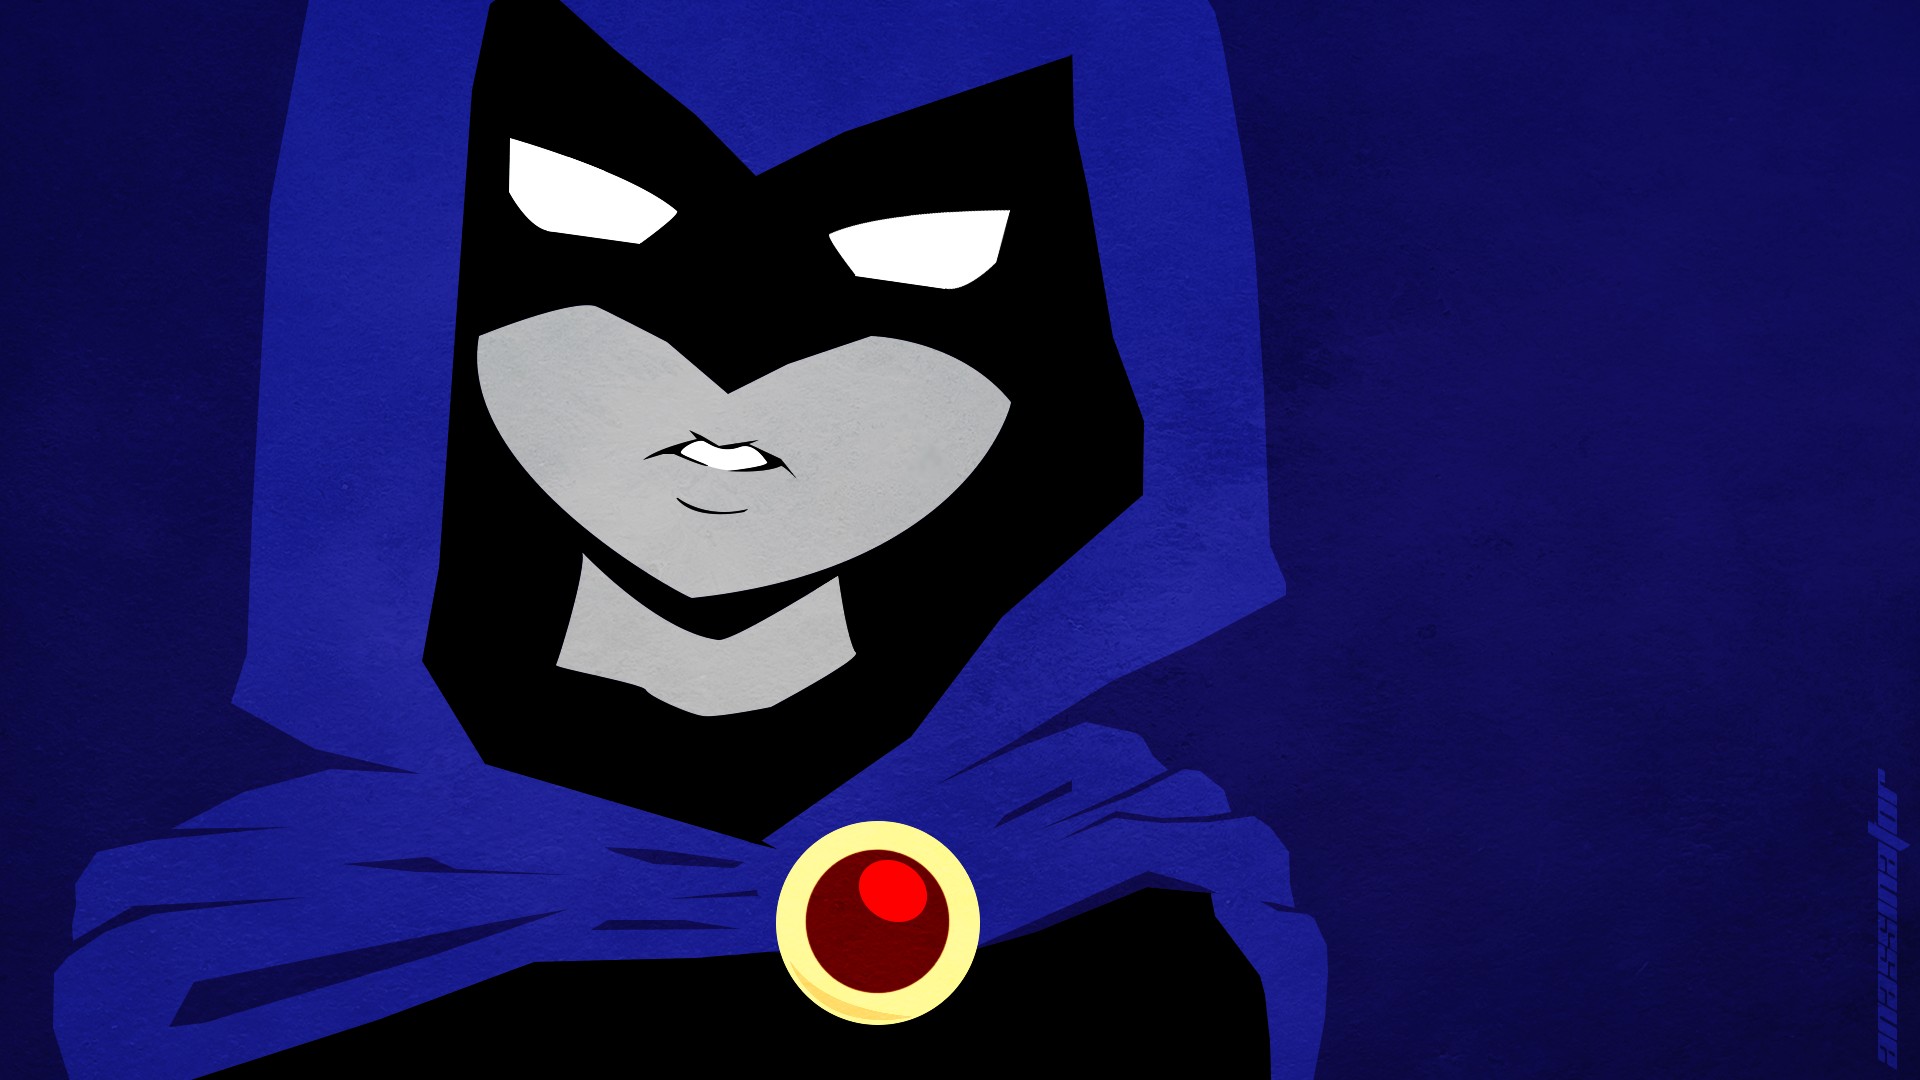 4. Raven from Teen Titans - wide 10